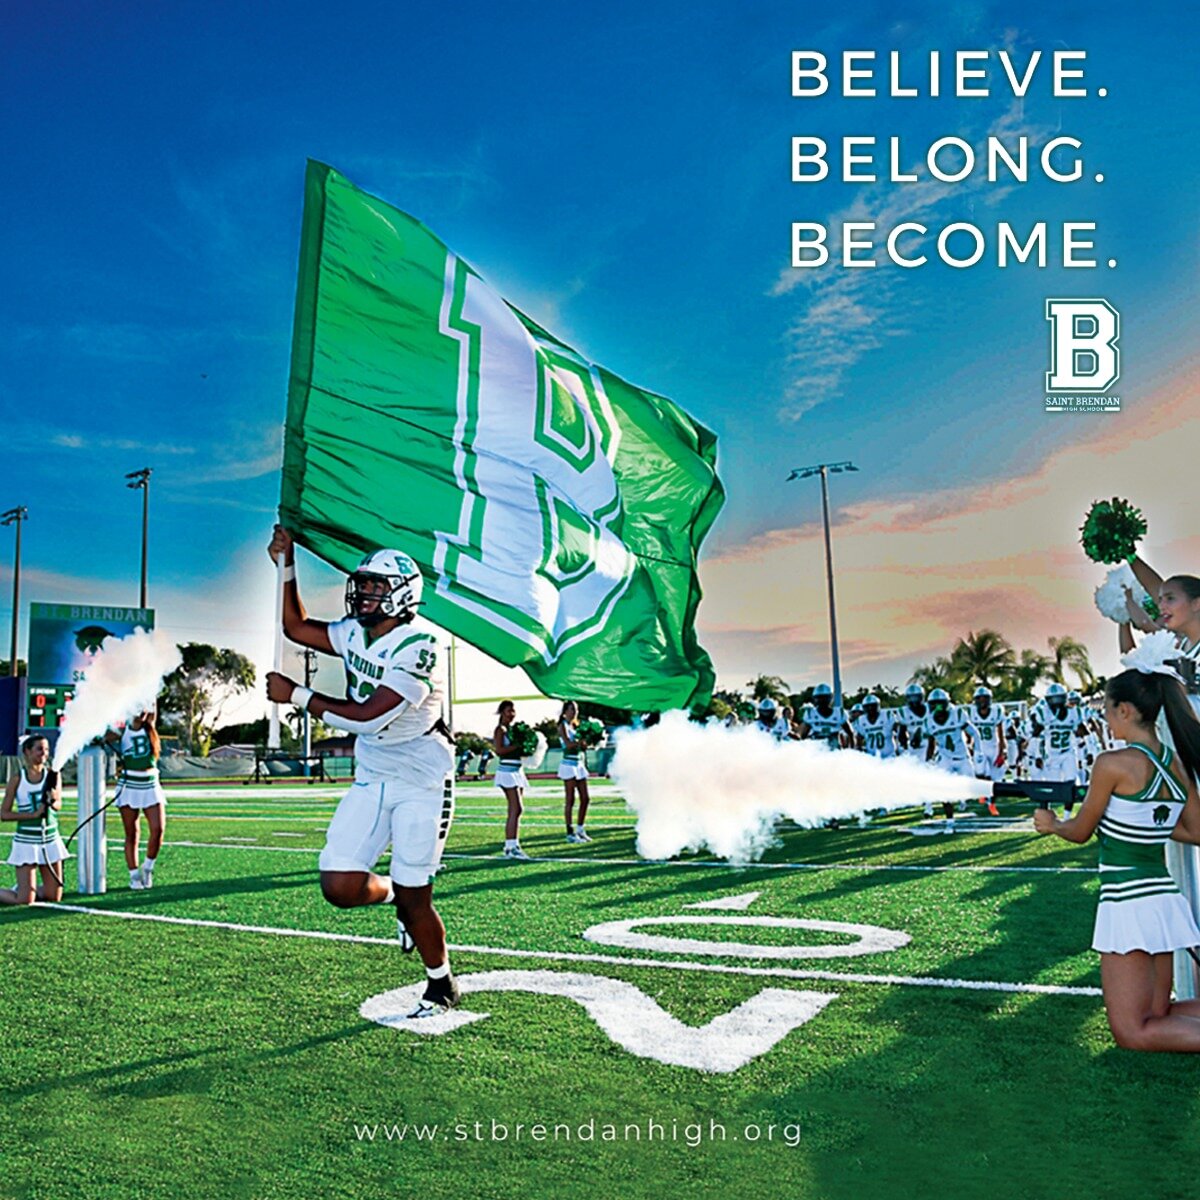 St. Brendan High School has developed an authentic Catholic educational experience, guaranteed by the Archdiocese of Miami, in which students are prepared for college and heaven through a co-ed and faith centered pedagogical model based on Academies 